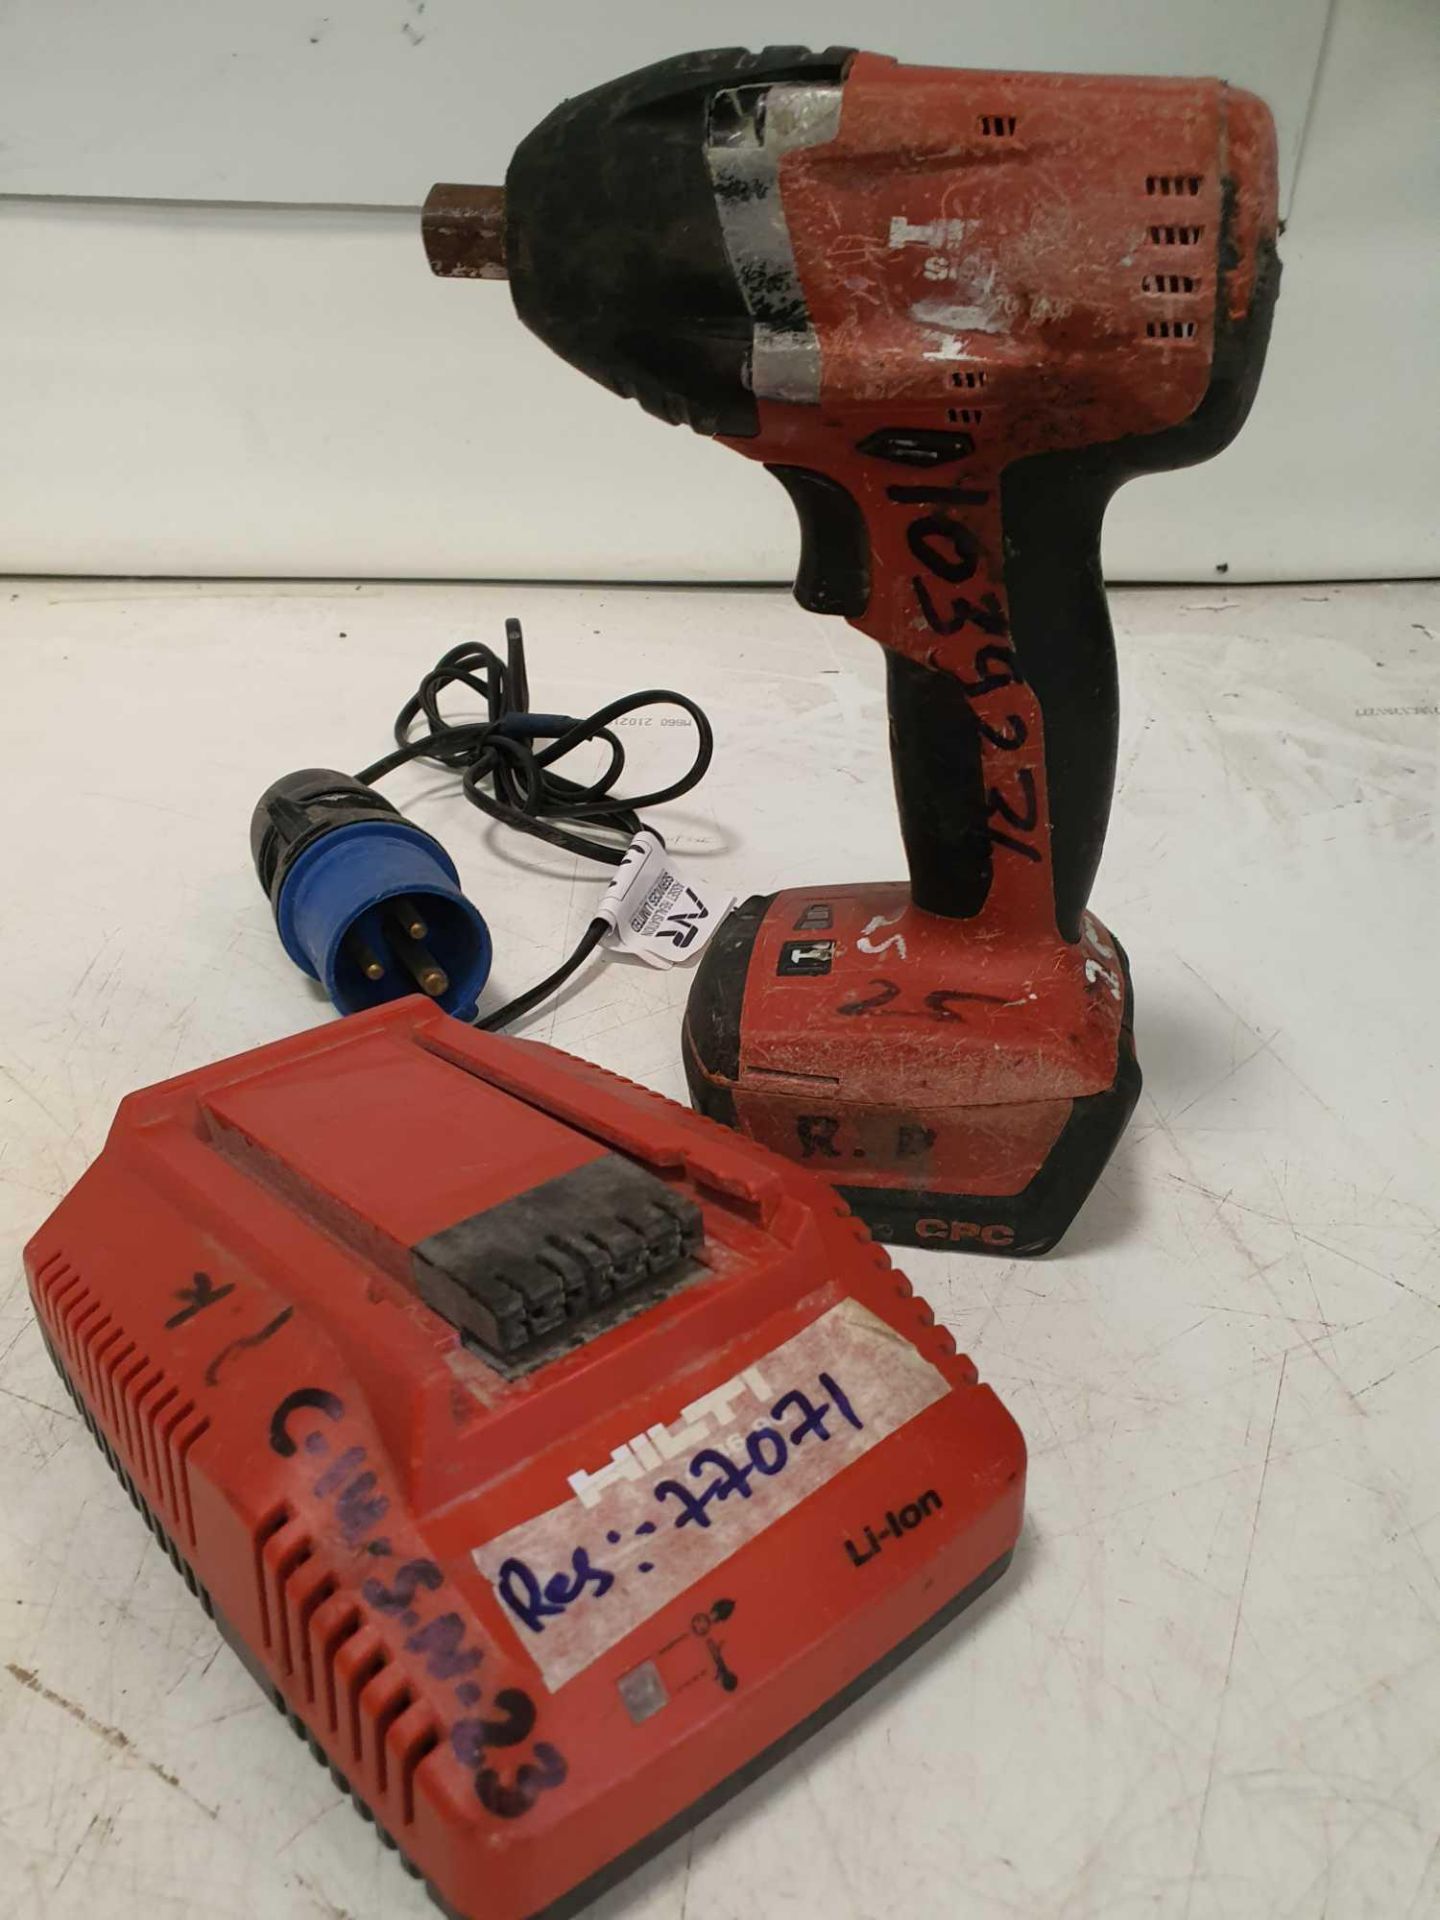 Hilti impact wrench gun with charger